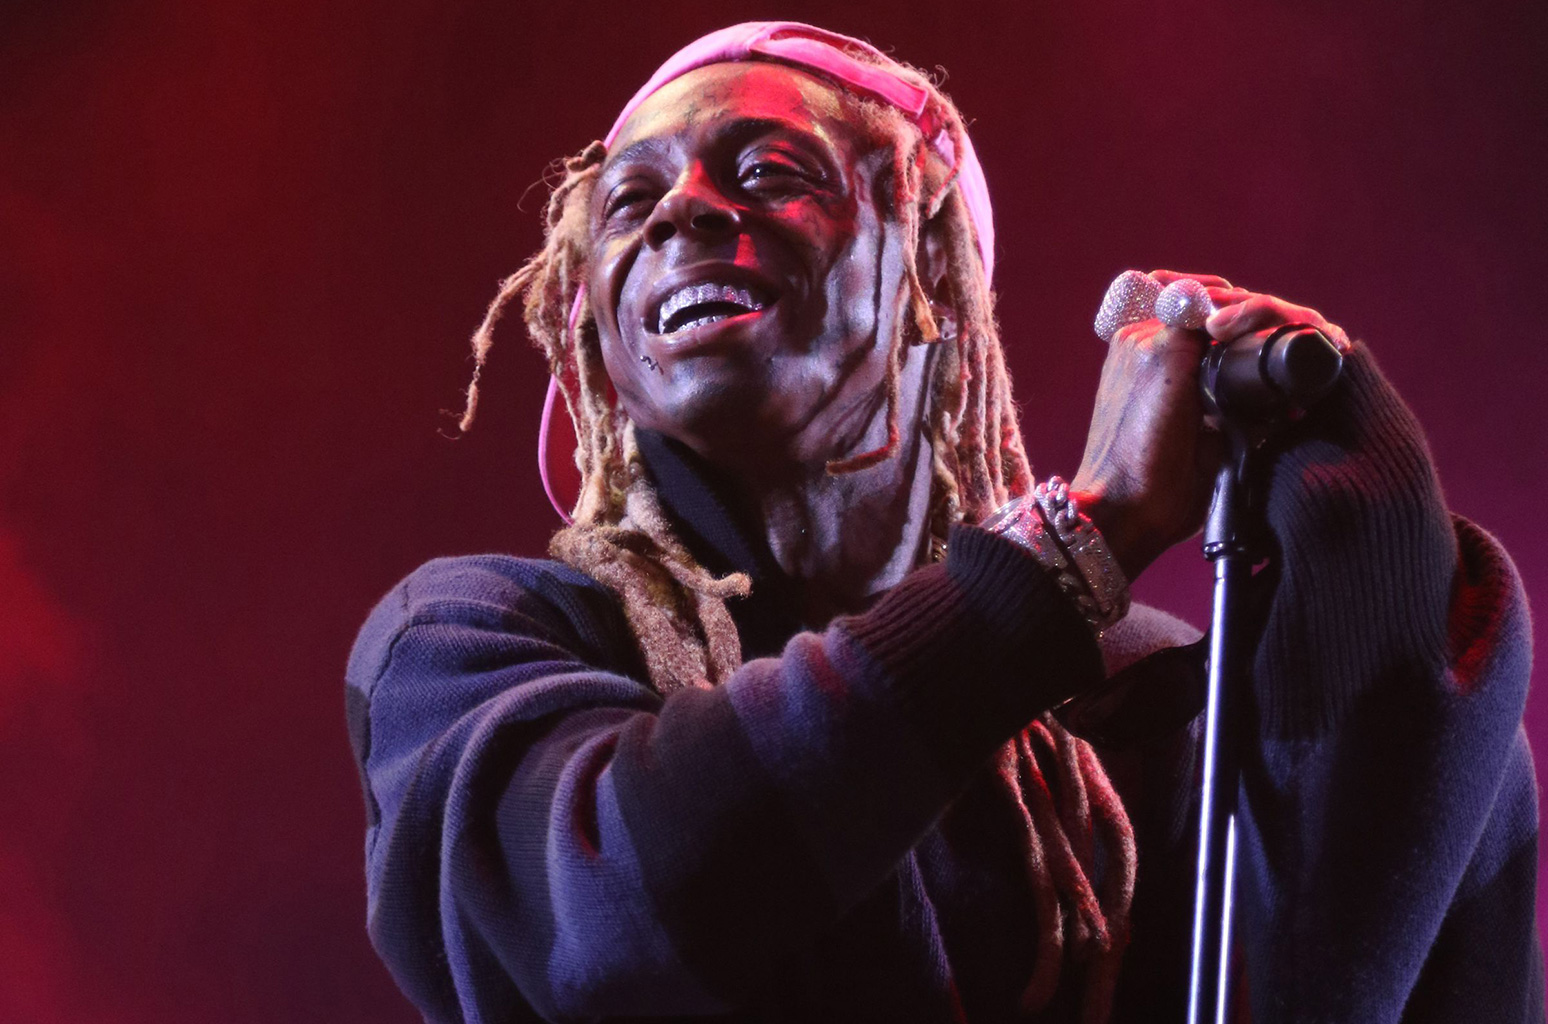 Fans Call Out Lil Wayne'S Apple Music Top 100 Albums Snub As New Music Is Expected 1